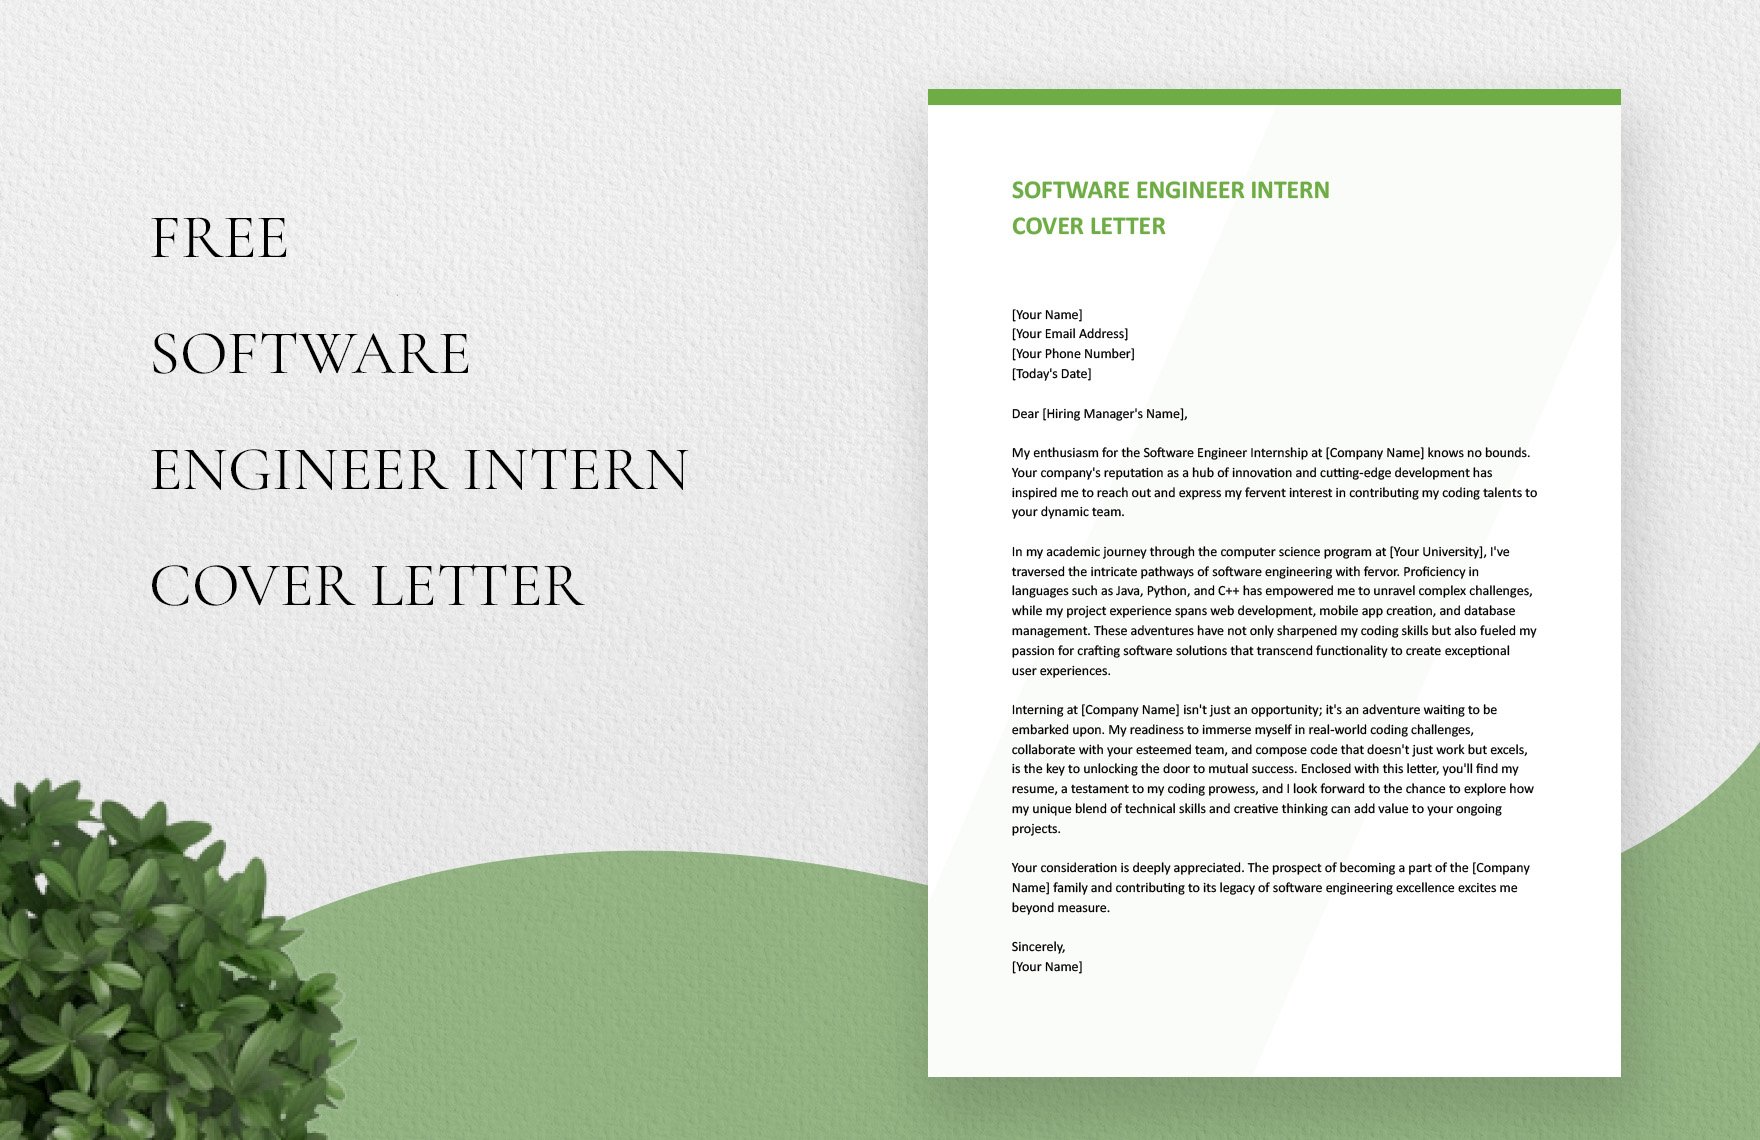 Software Engineer Intern Cover Letter in Word, Google Docs